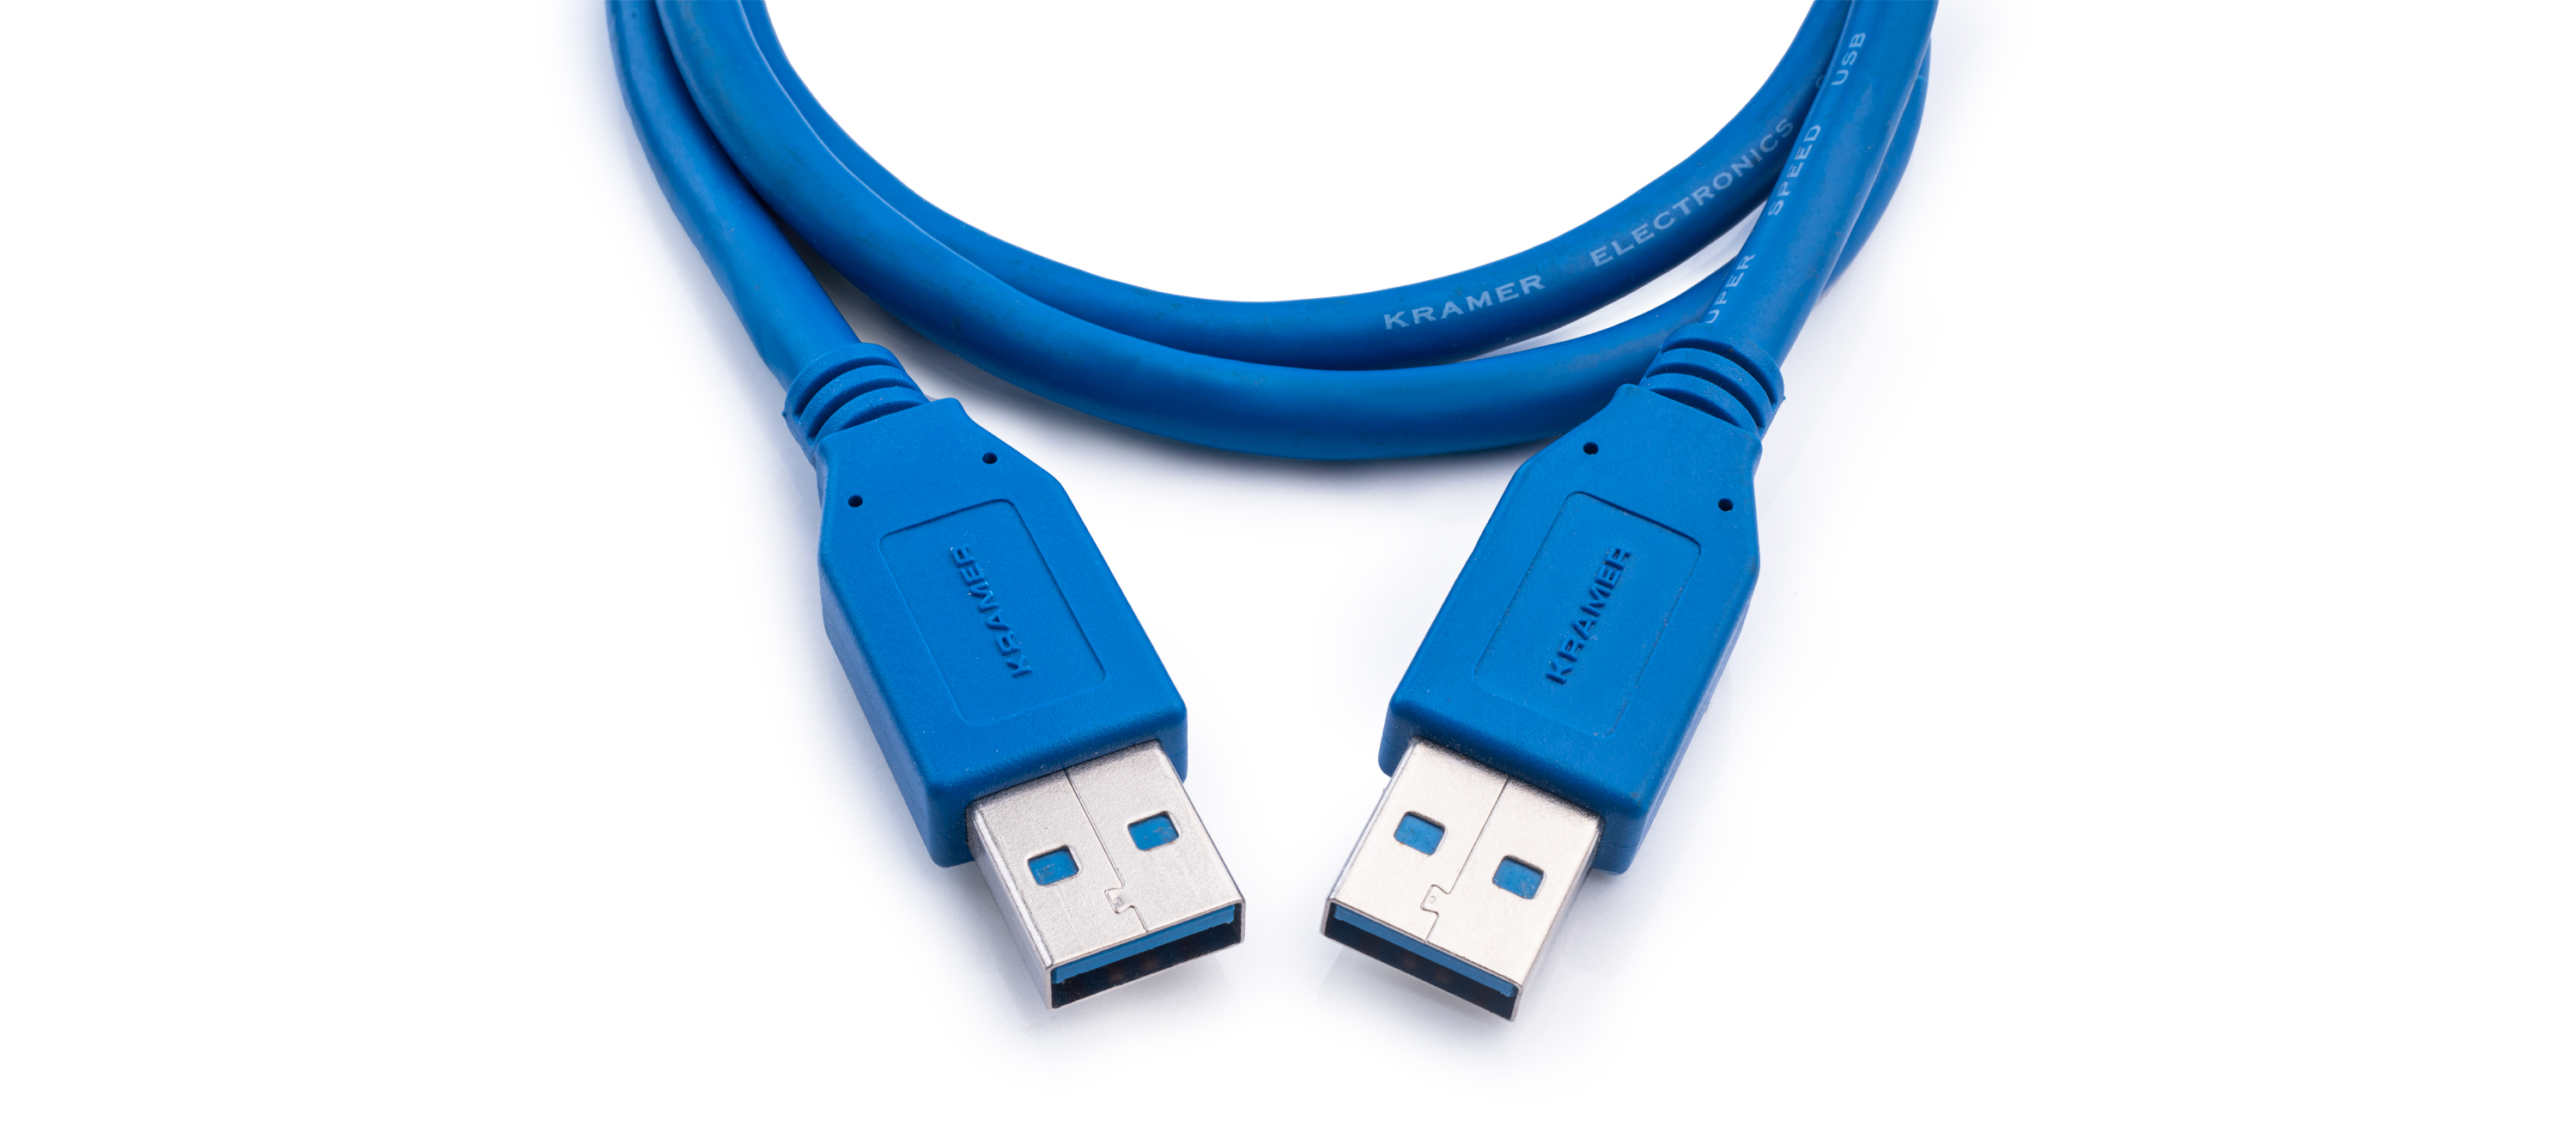 C-USB3/AA-10 USB 3.0 A (M) to A (M) Cable 10'